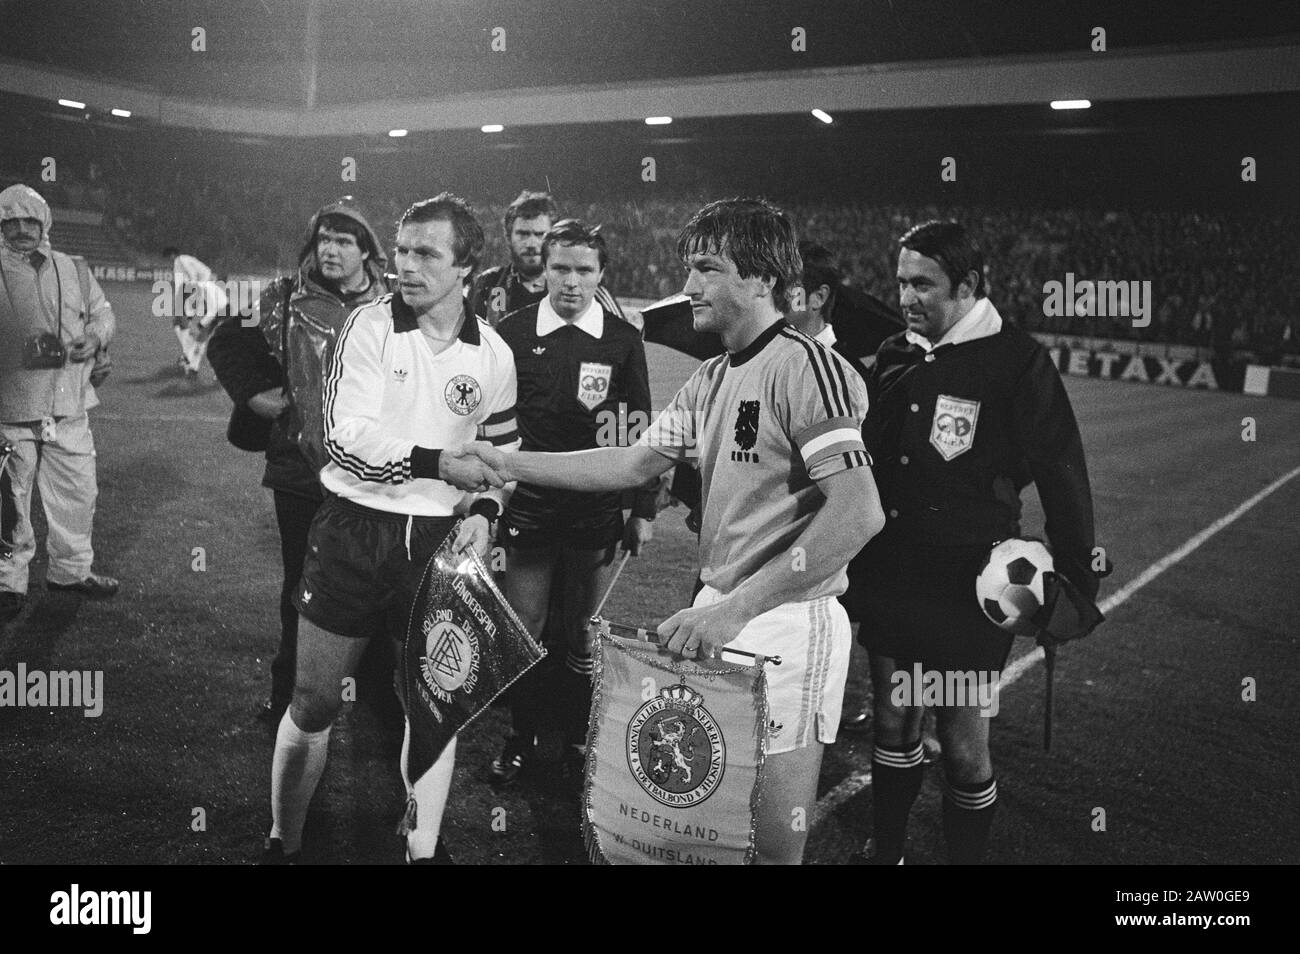 Netherlands against West Germany 1-1, shake before the game Date: October 12, 1980 Location: Netherlands, West Germany Keywords: sport, soccer, sports photographer : Bogaerts, Rob / Anefo Copyright Holder: National Archives Material Type: Negative (black / white) archive inventory number: see access 2.24.01.05 Stock Photo